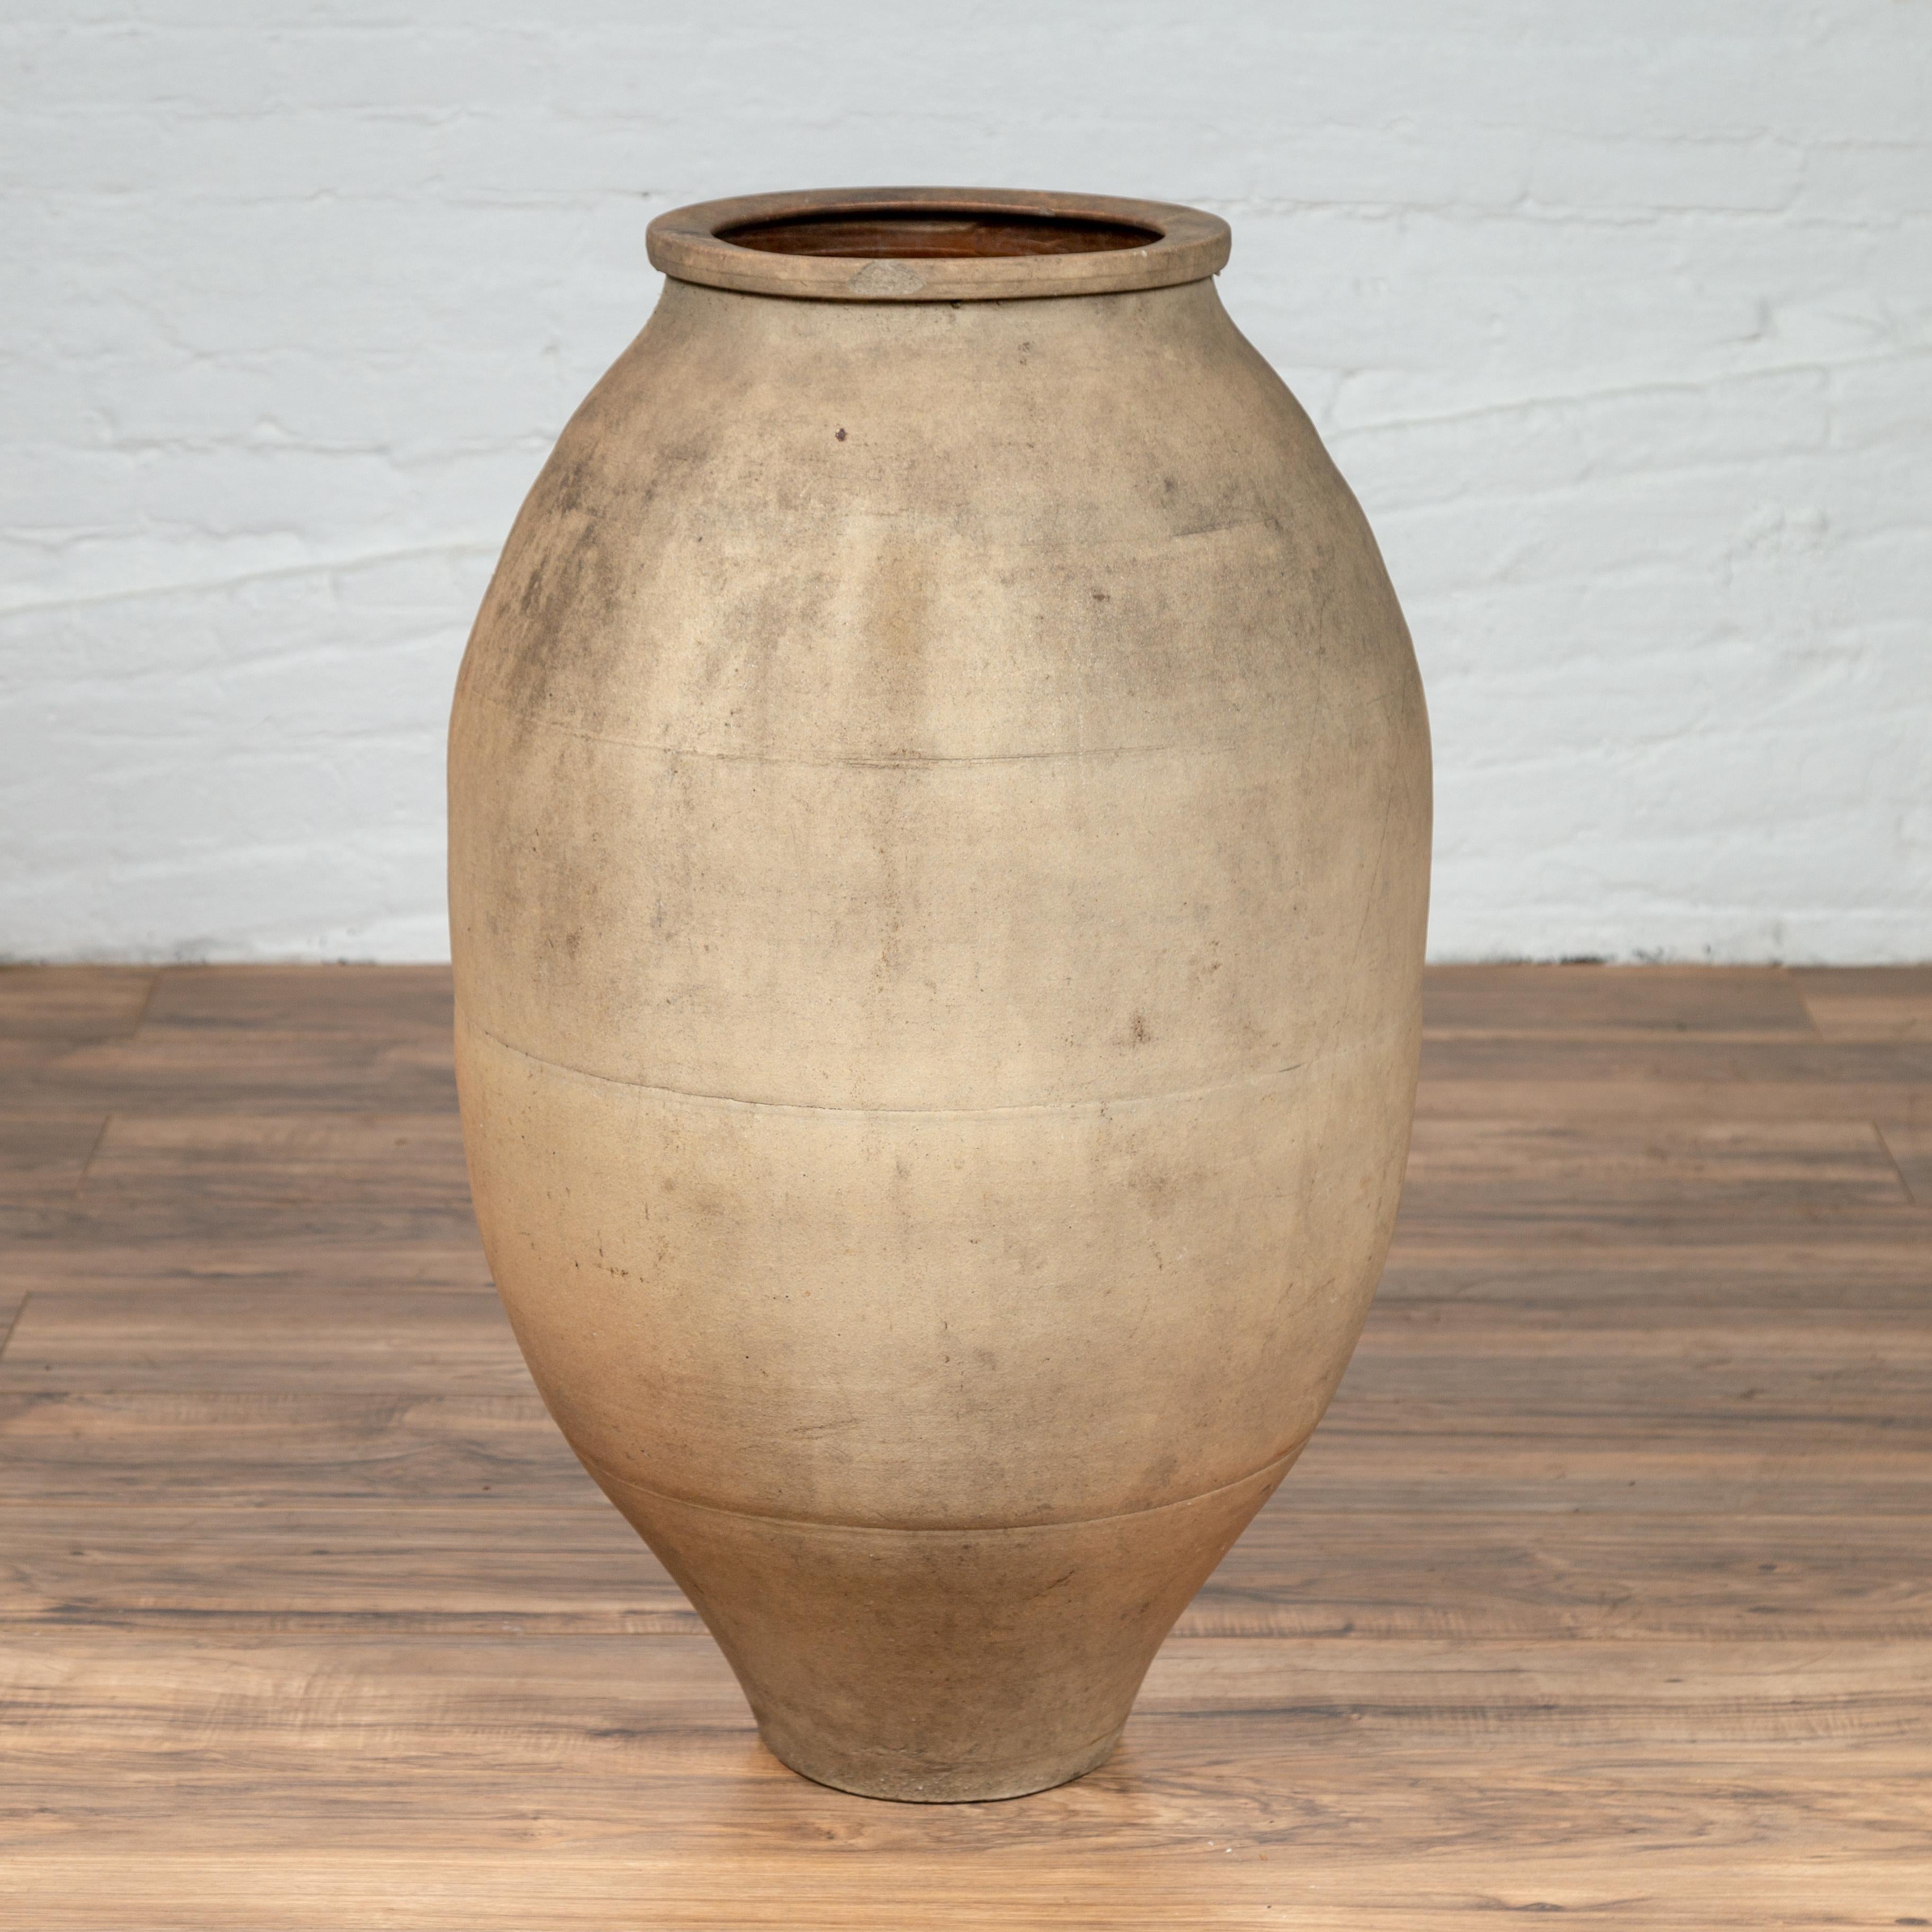 A tall Japanese Shigaraki stoneware grain storage urn from the early 20th century with beige sand patina. Born in one of the six ancient kilns of Japan, this large Shigaraki urn is made of sandy clay typical of the region, and features a rounded